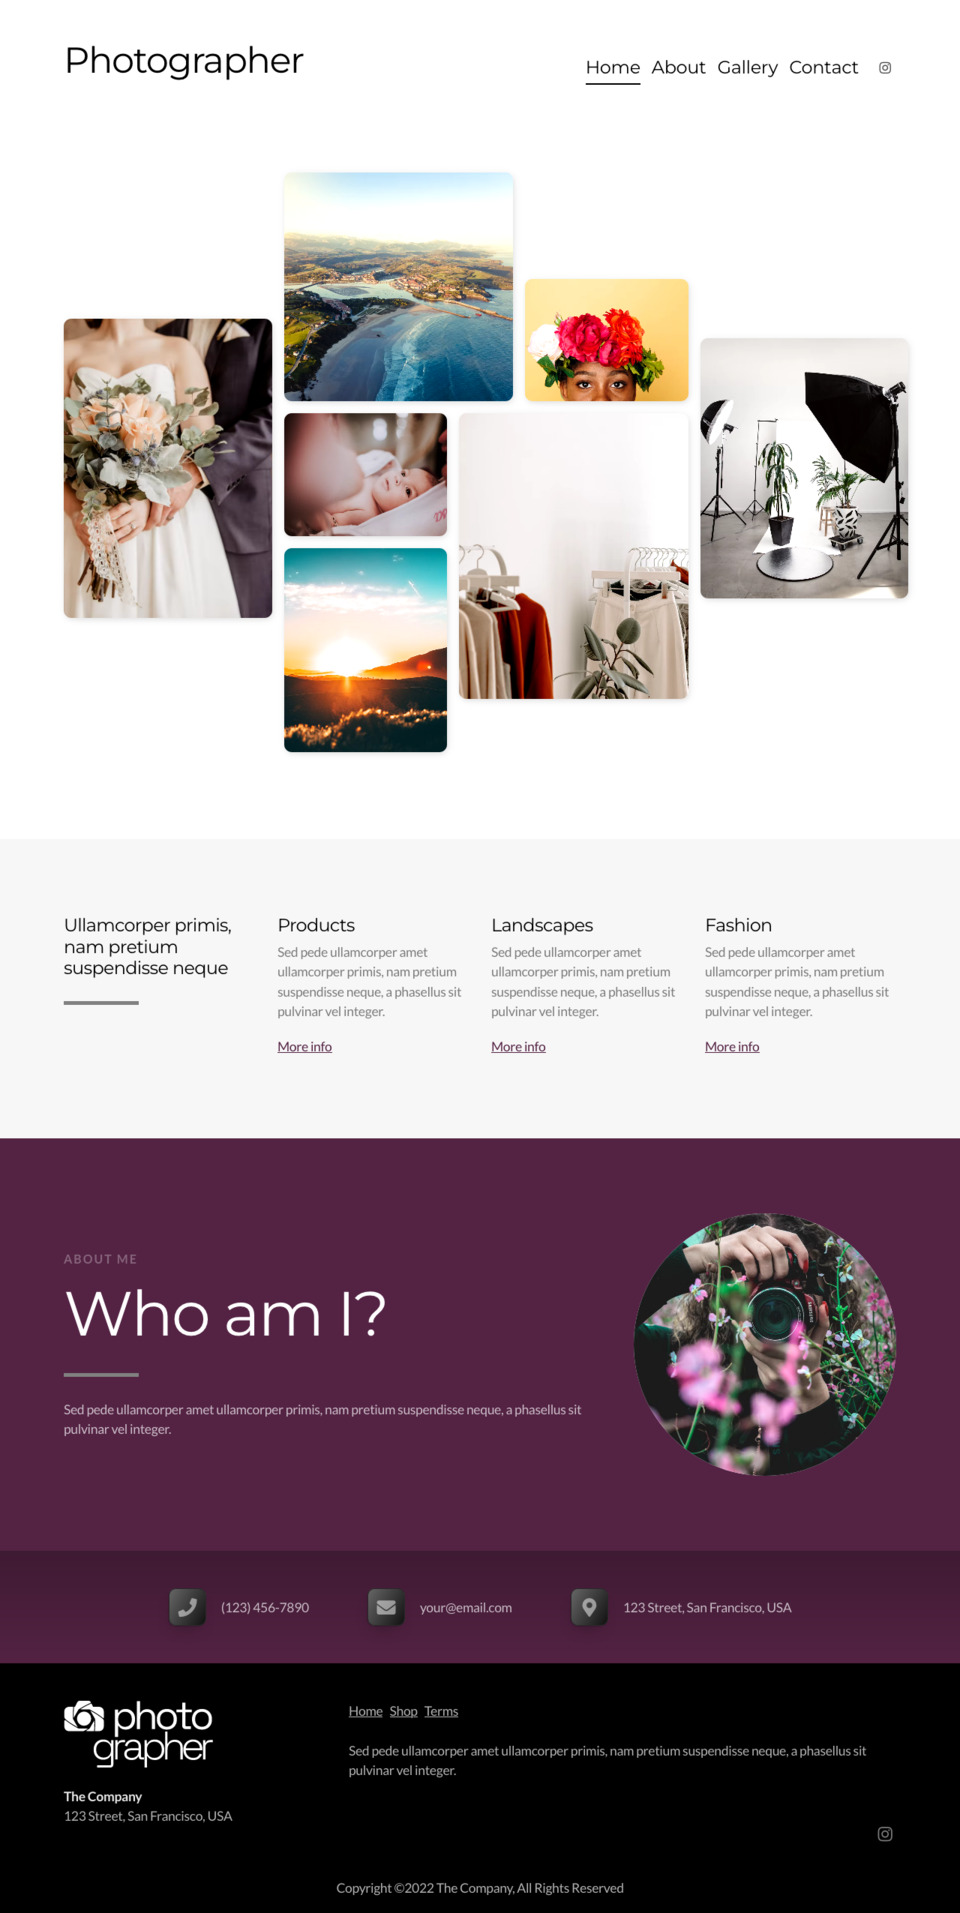 Photographer Website Template - Ideal for photographers, studios, artists, creatives, and anyone looking to showcase visual content online.